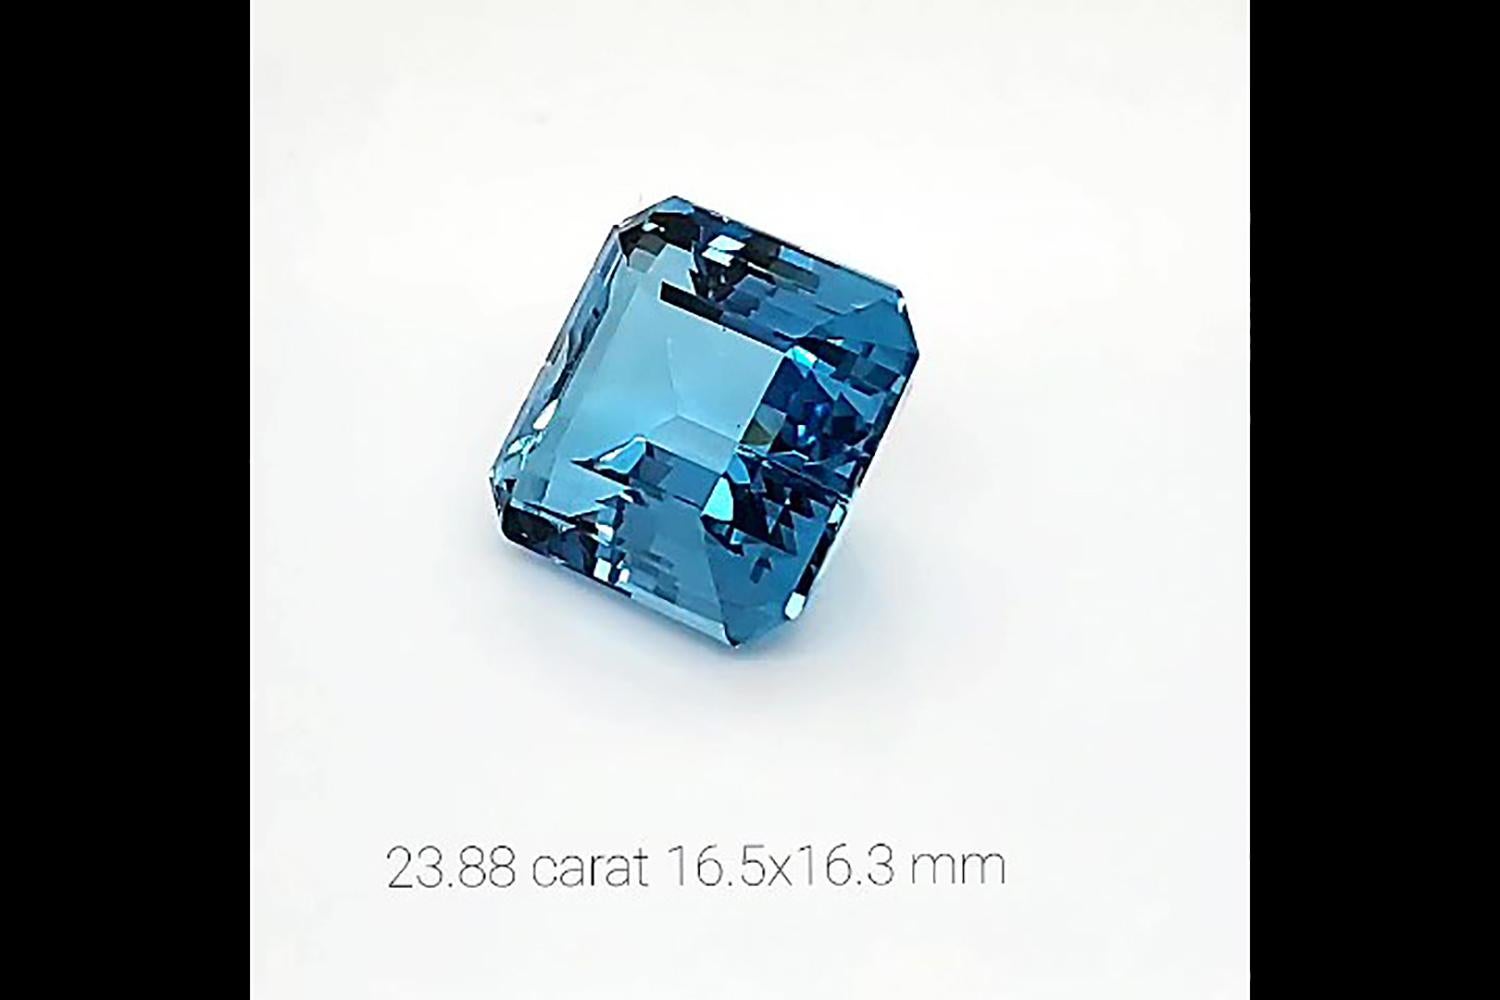 23.88 carat Natural Blue Ascher cut Aquamarine gemstone, of a high quality intense blue, transparent mineral with no inclusions, perfect choice for collectors or to commission a custom, unique piece of jewelry with it.
We are master jewelers with a